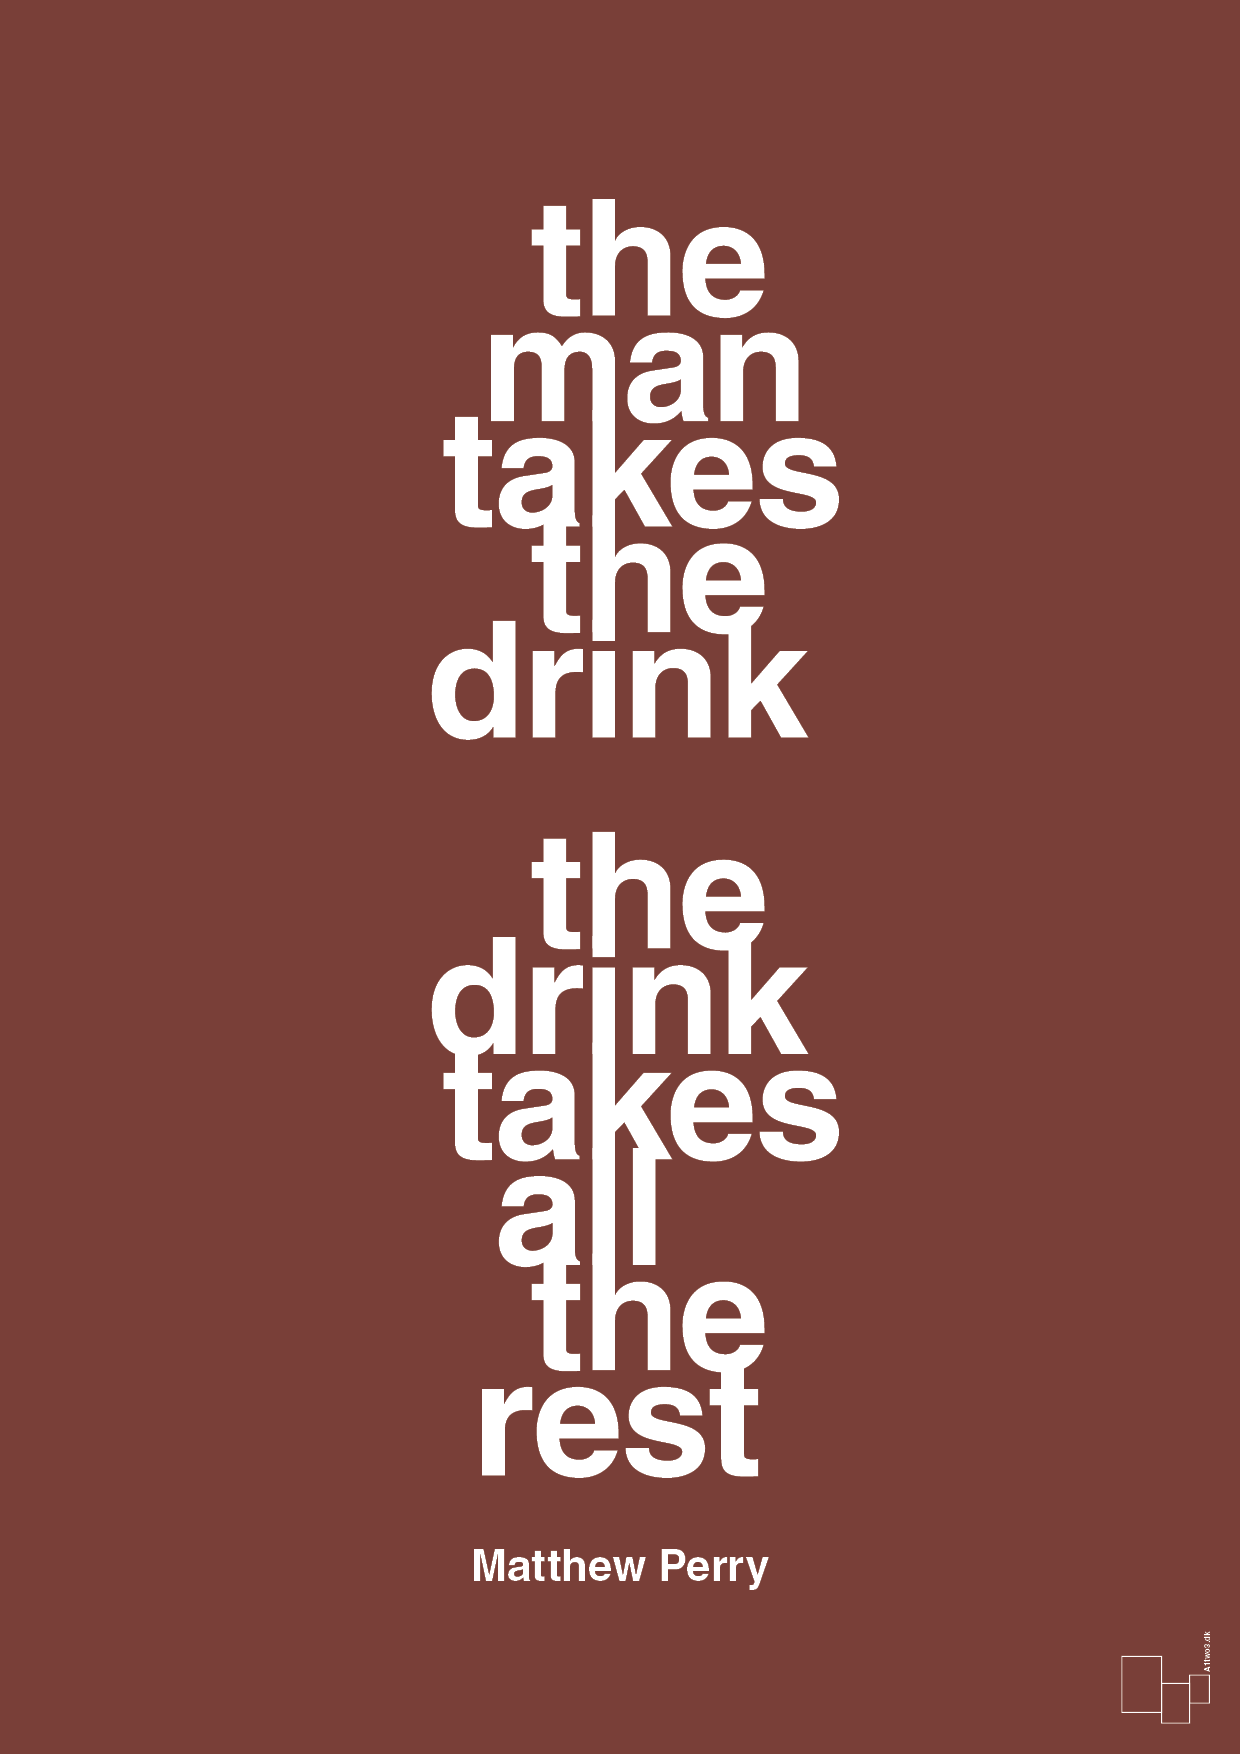 the man takes the drink the drink takes all the rest - Plakat med Citater i Red Pepper